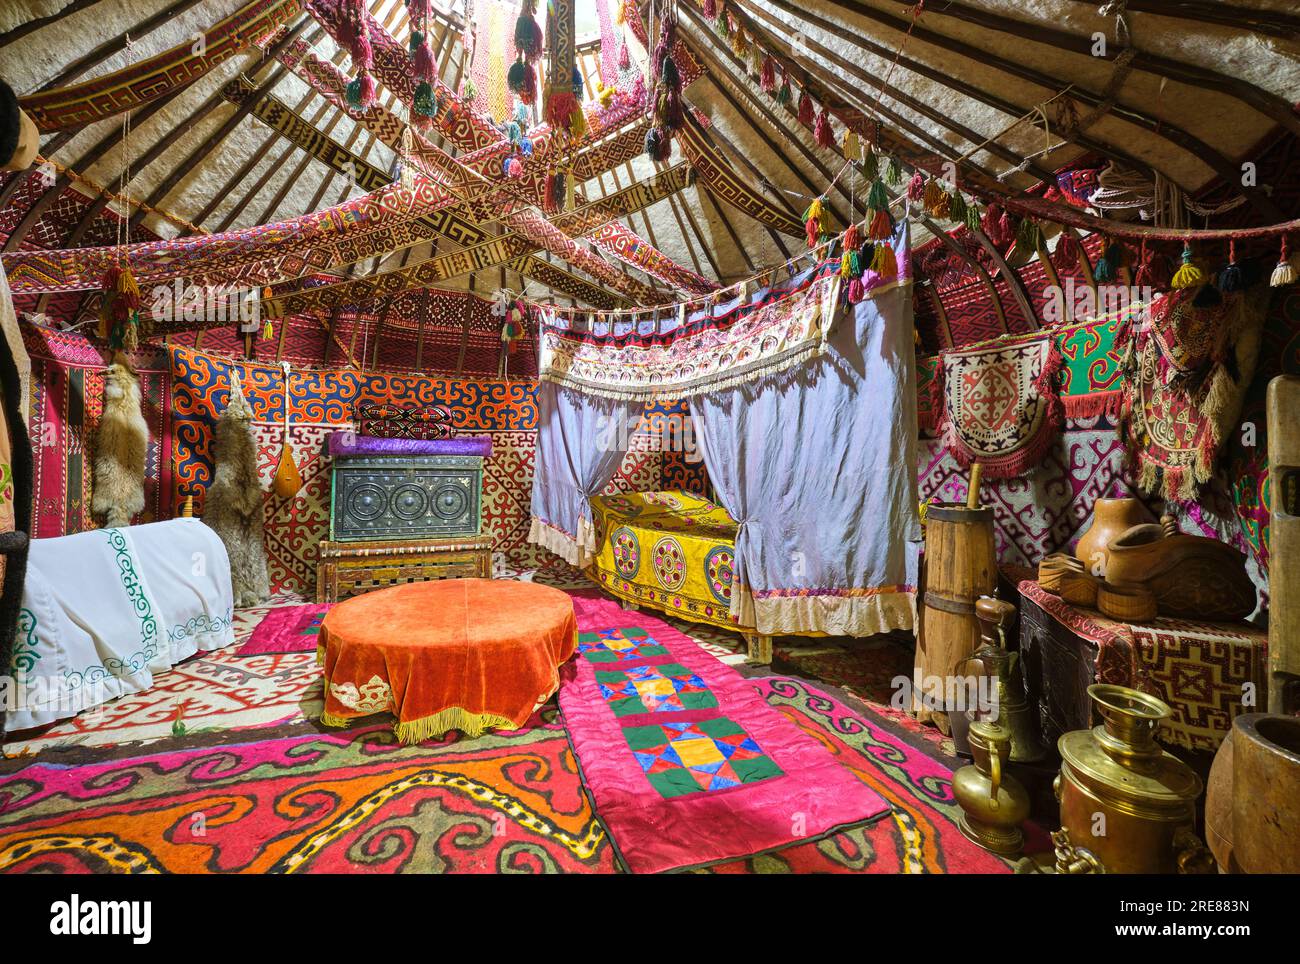 View inside a typical yurt tent, home, details of rich, colorful fabrics, textiles, rugs, furniture. At the South Kazakhstan Regional Historical Museu Stock Photo